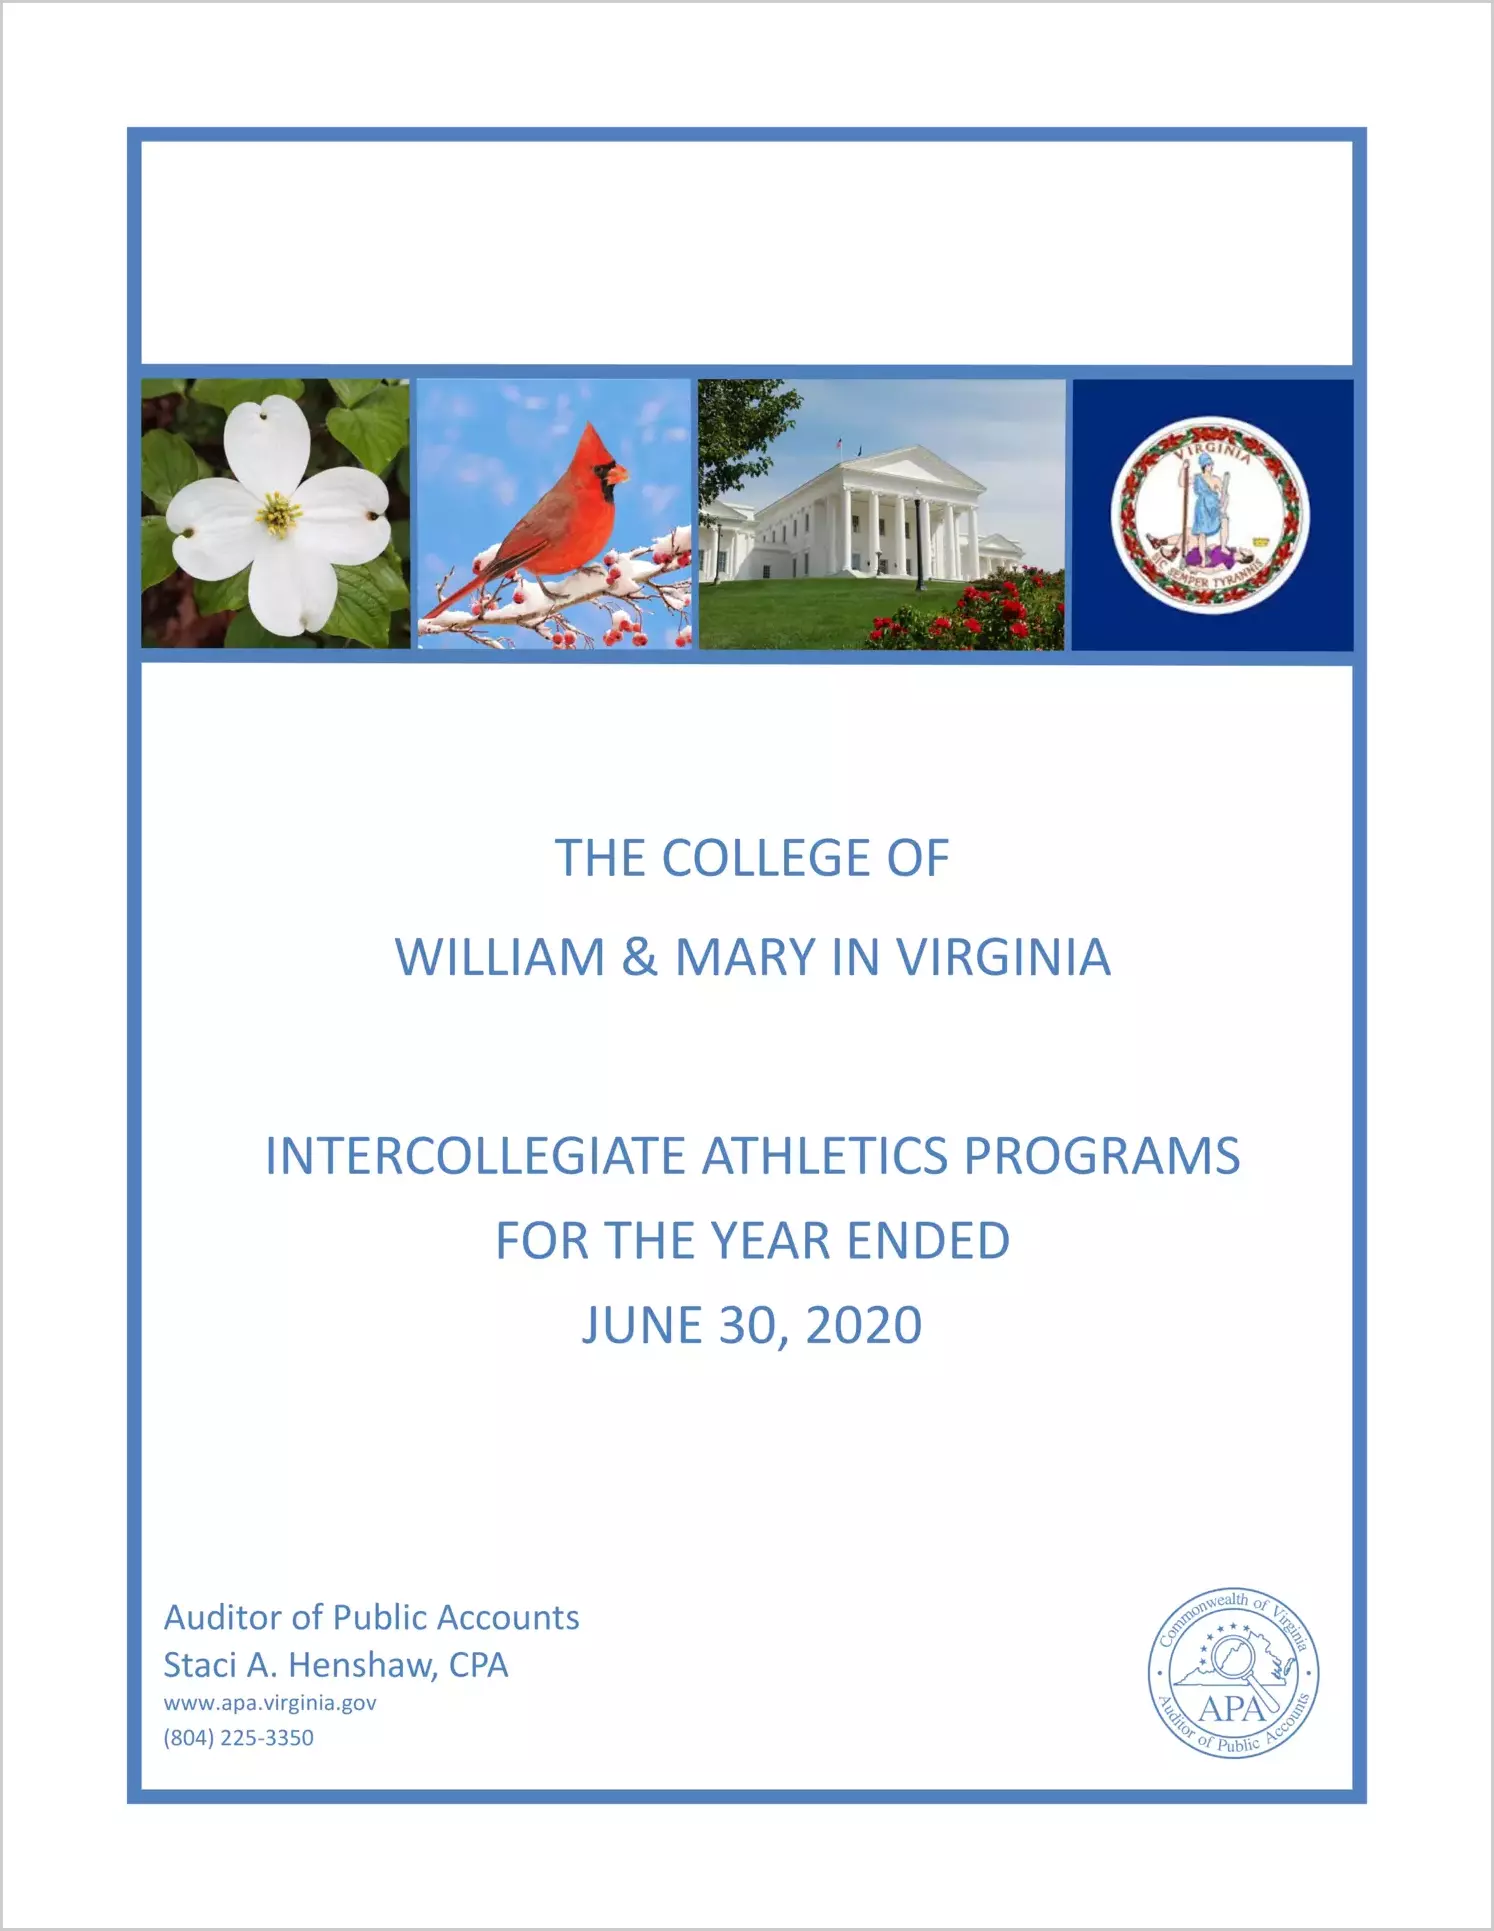 The College of William & Mary in Virginia Intercollegiate Athletics Programs for the year ended June 30, 2020